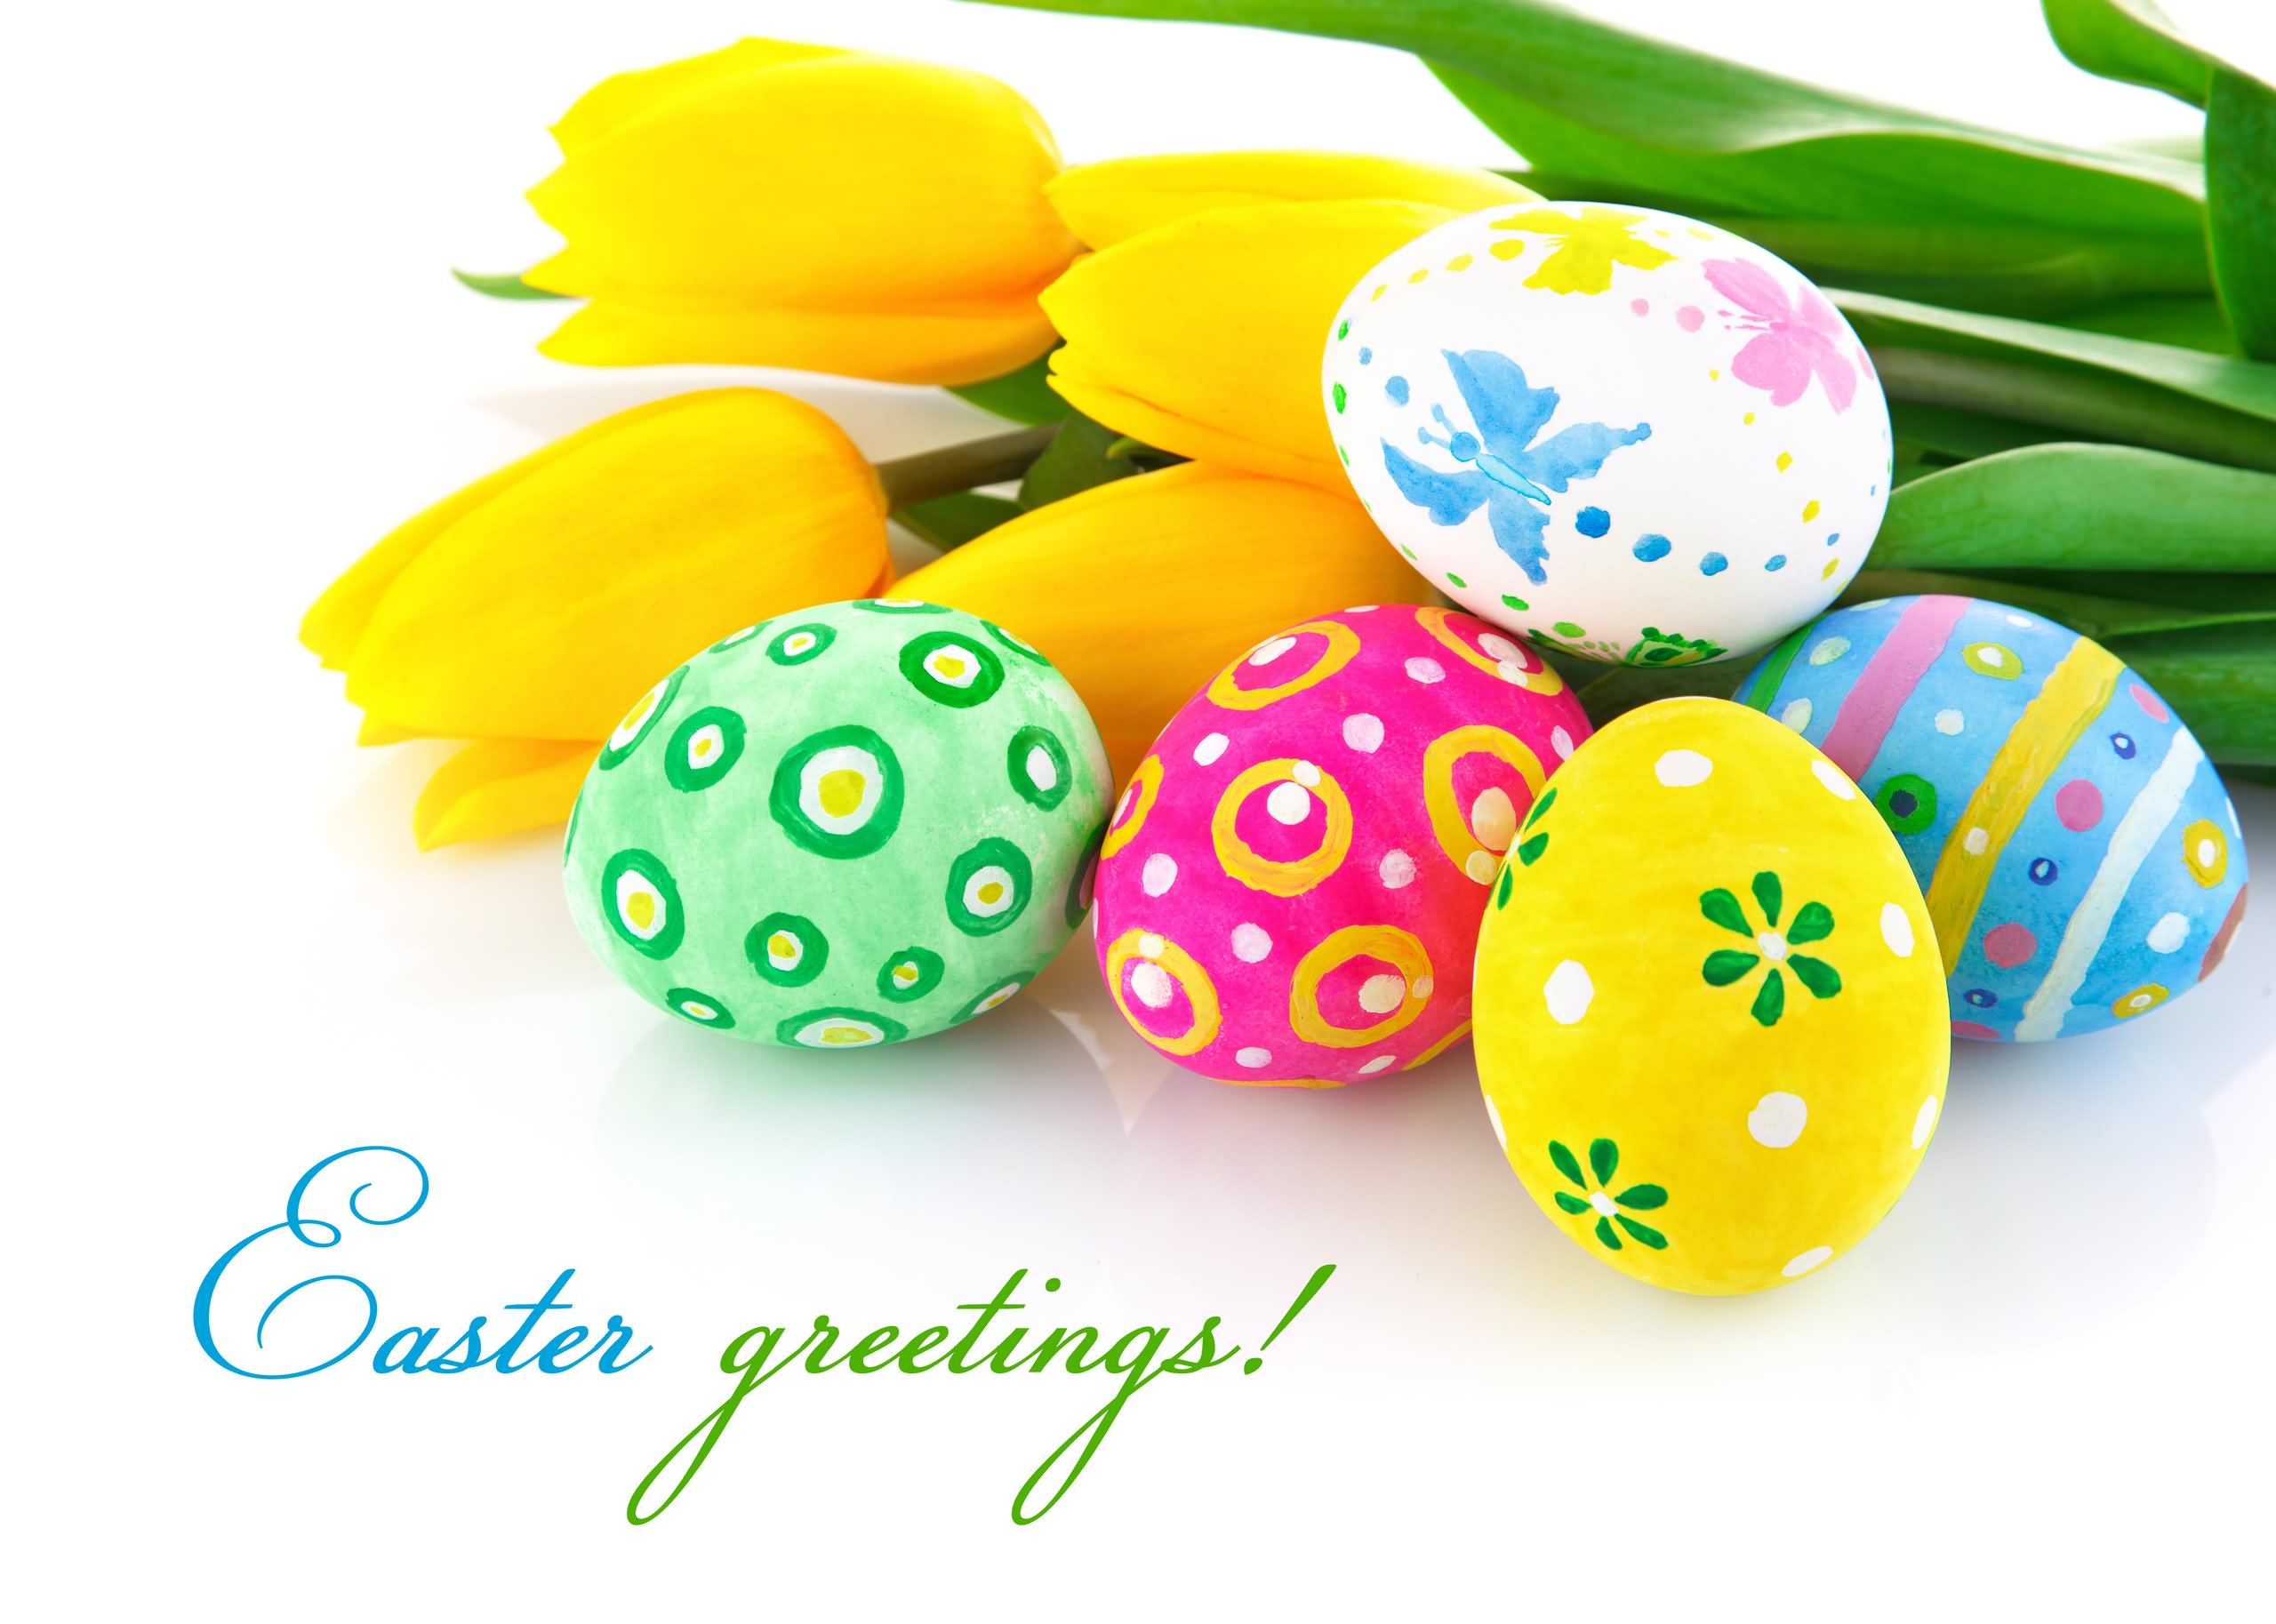 85 Very Beautiful Easter Greeting Pictures And Photos